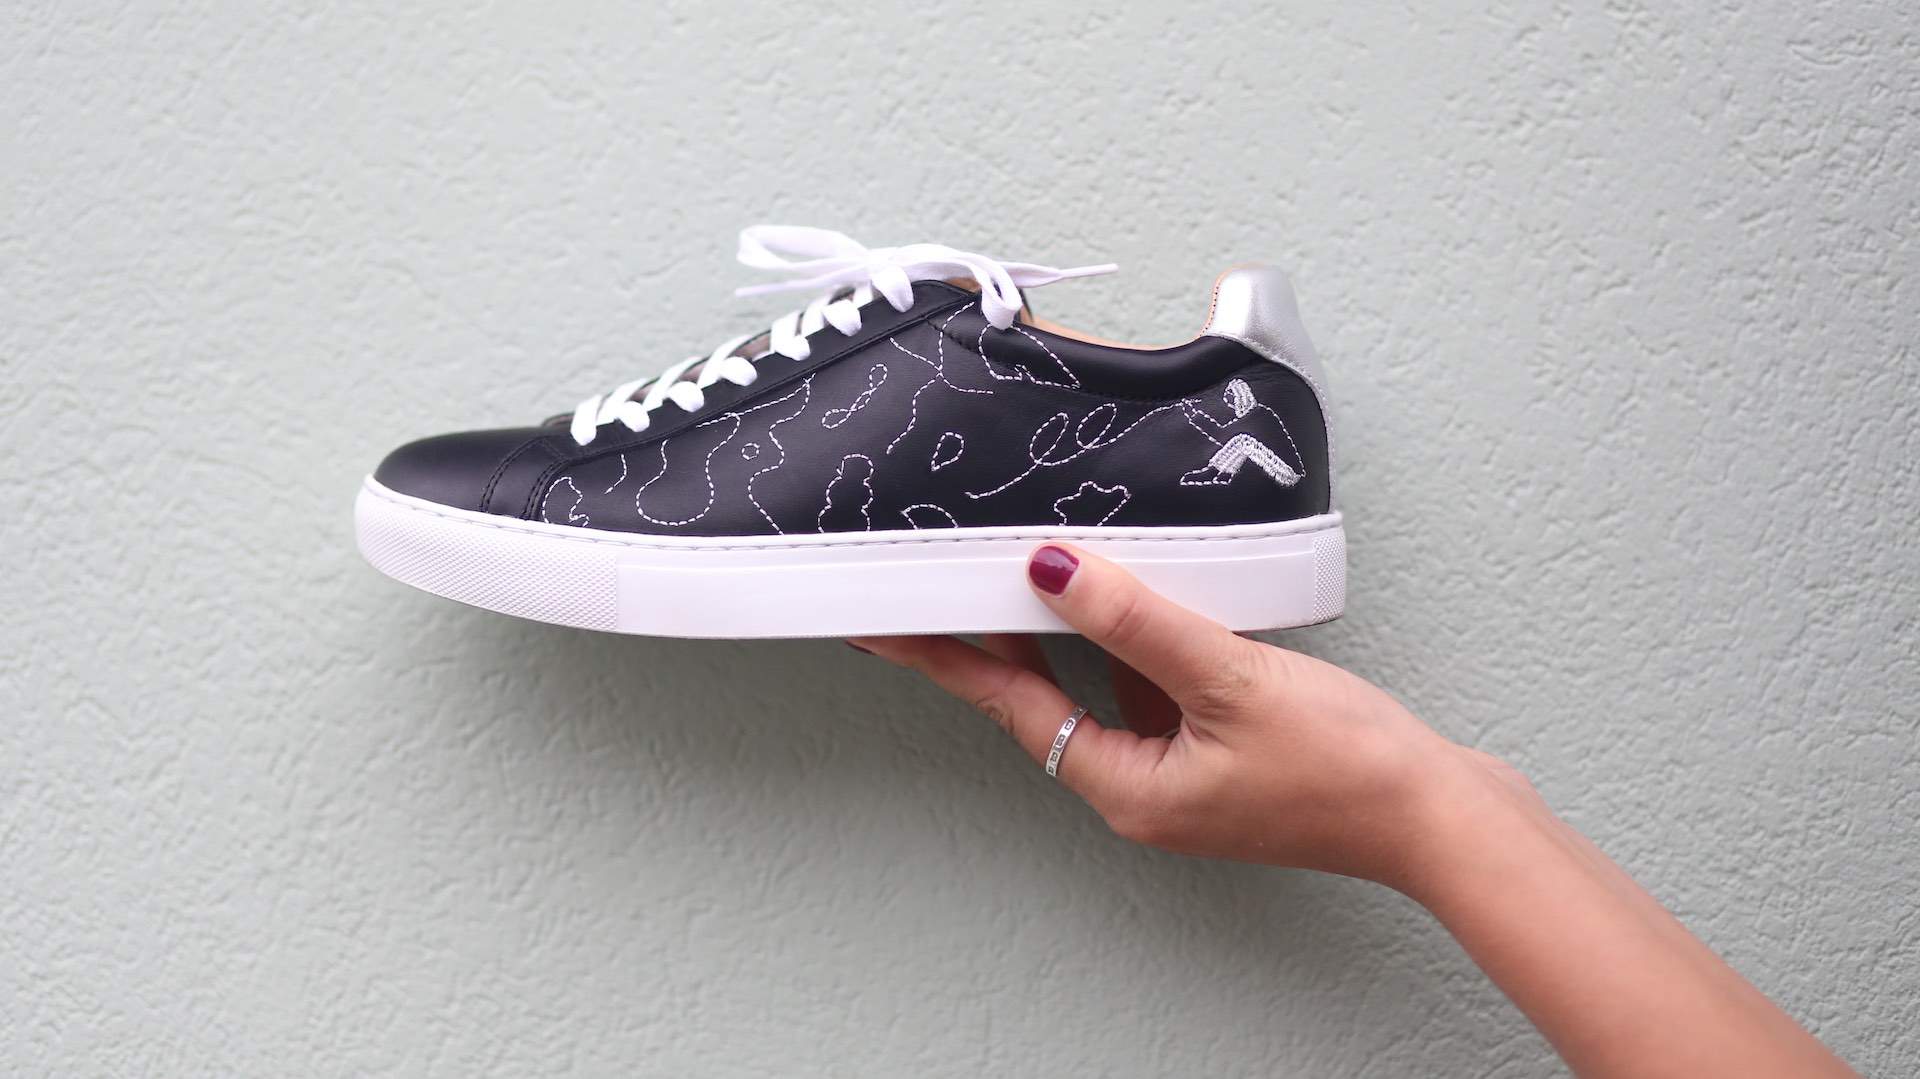 Melbourne Street Artist Carla McRae Unveils Collab with Bared Footwear